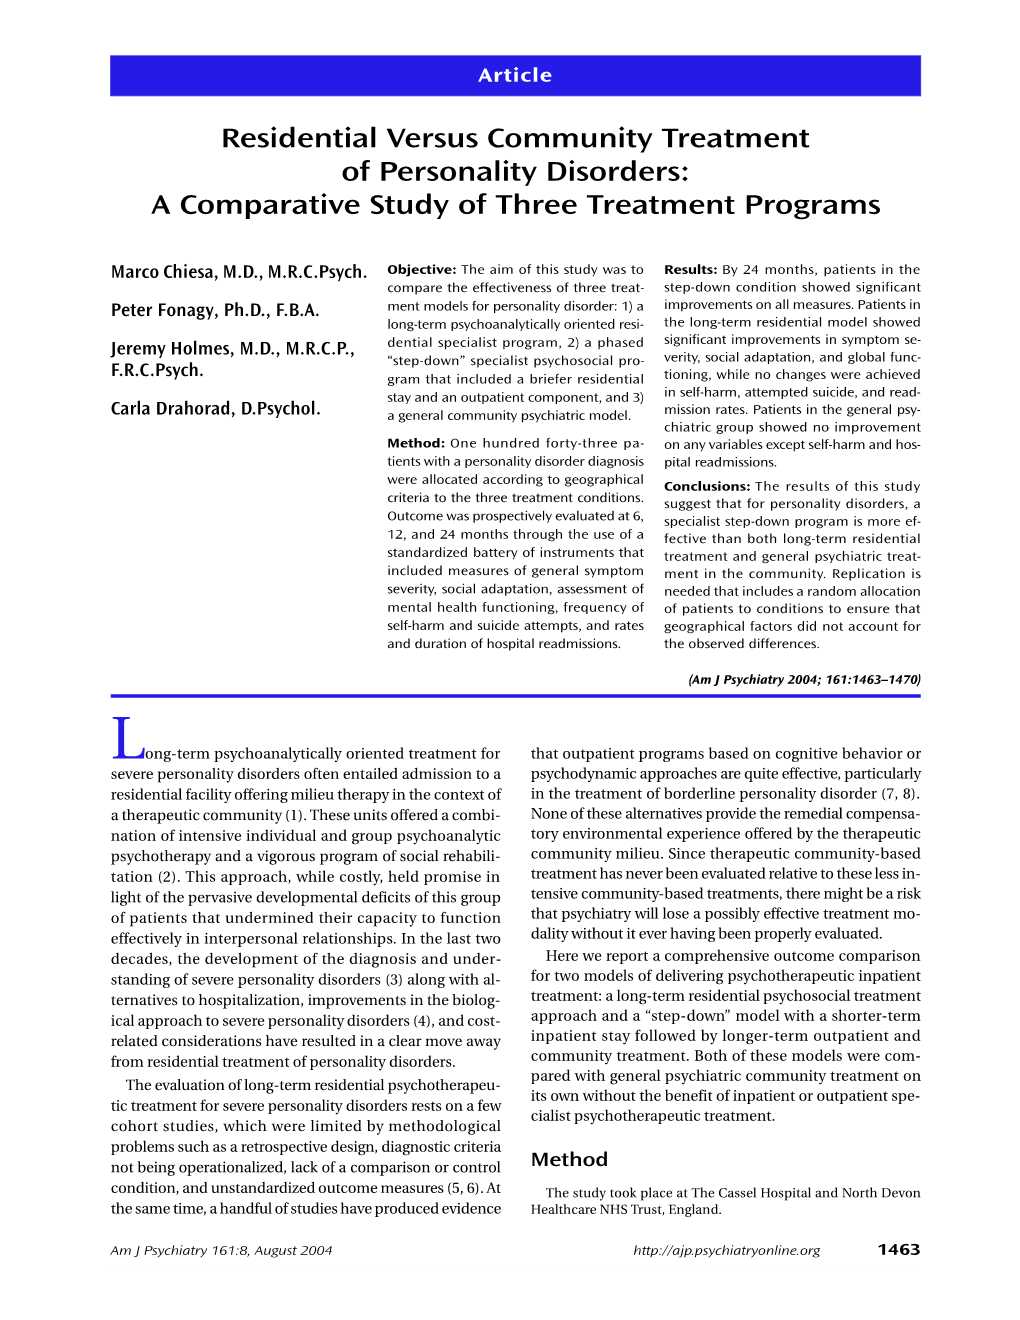 Residential Versus Community Treatment of Personality Disorders: a Comparative Study of Three Treatment Programs